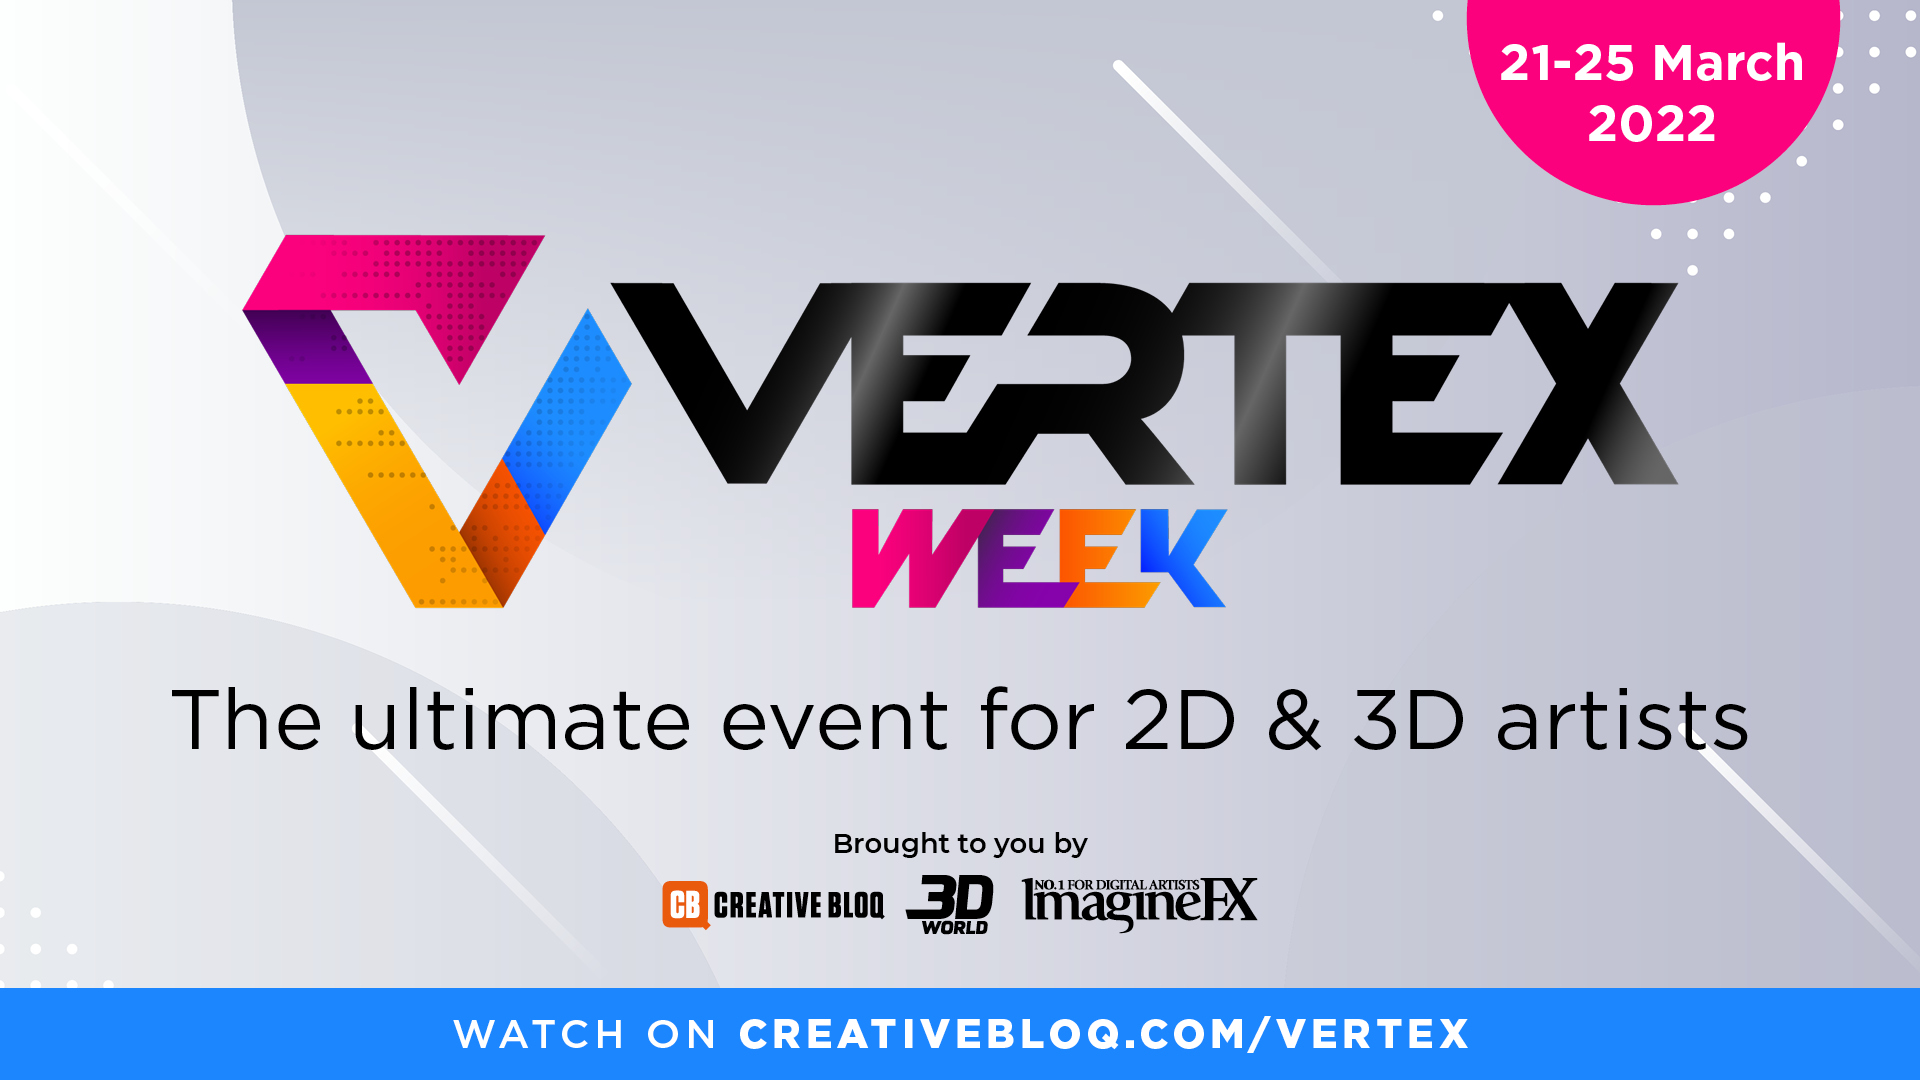 banner advertising Vertex, the ultimate event for 2D and 3D artists